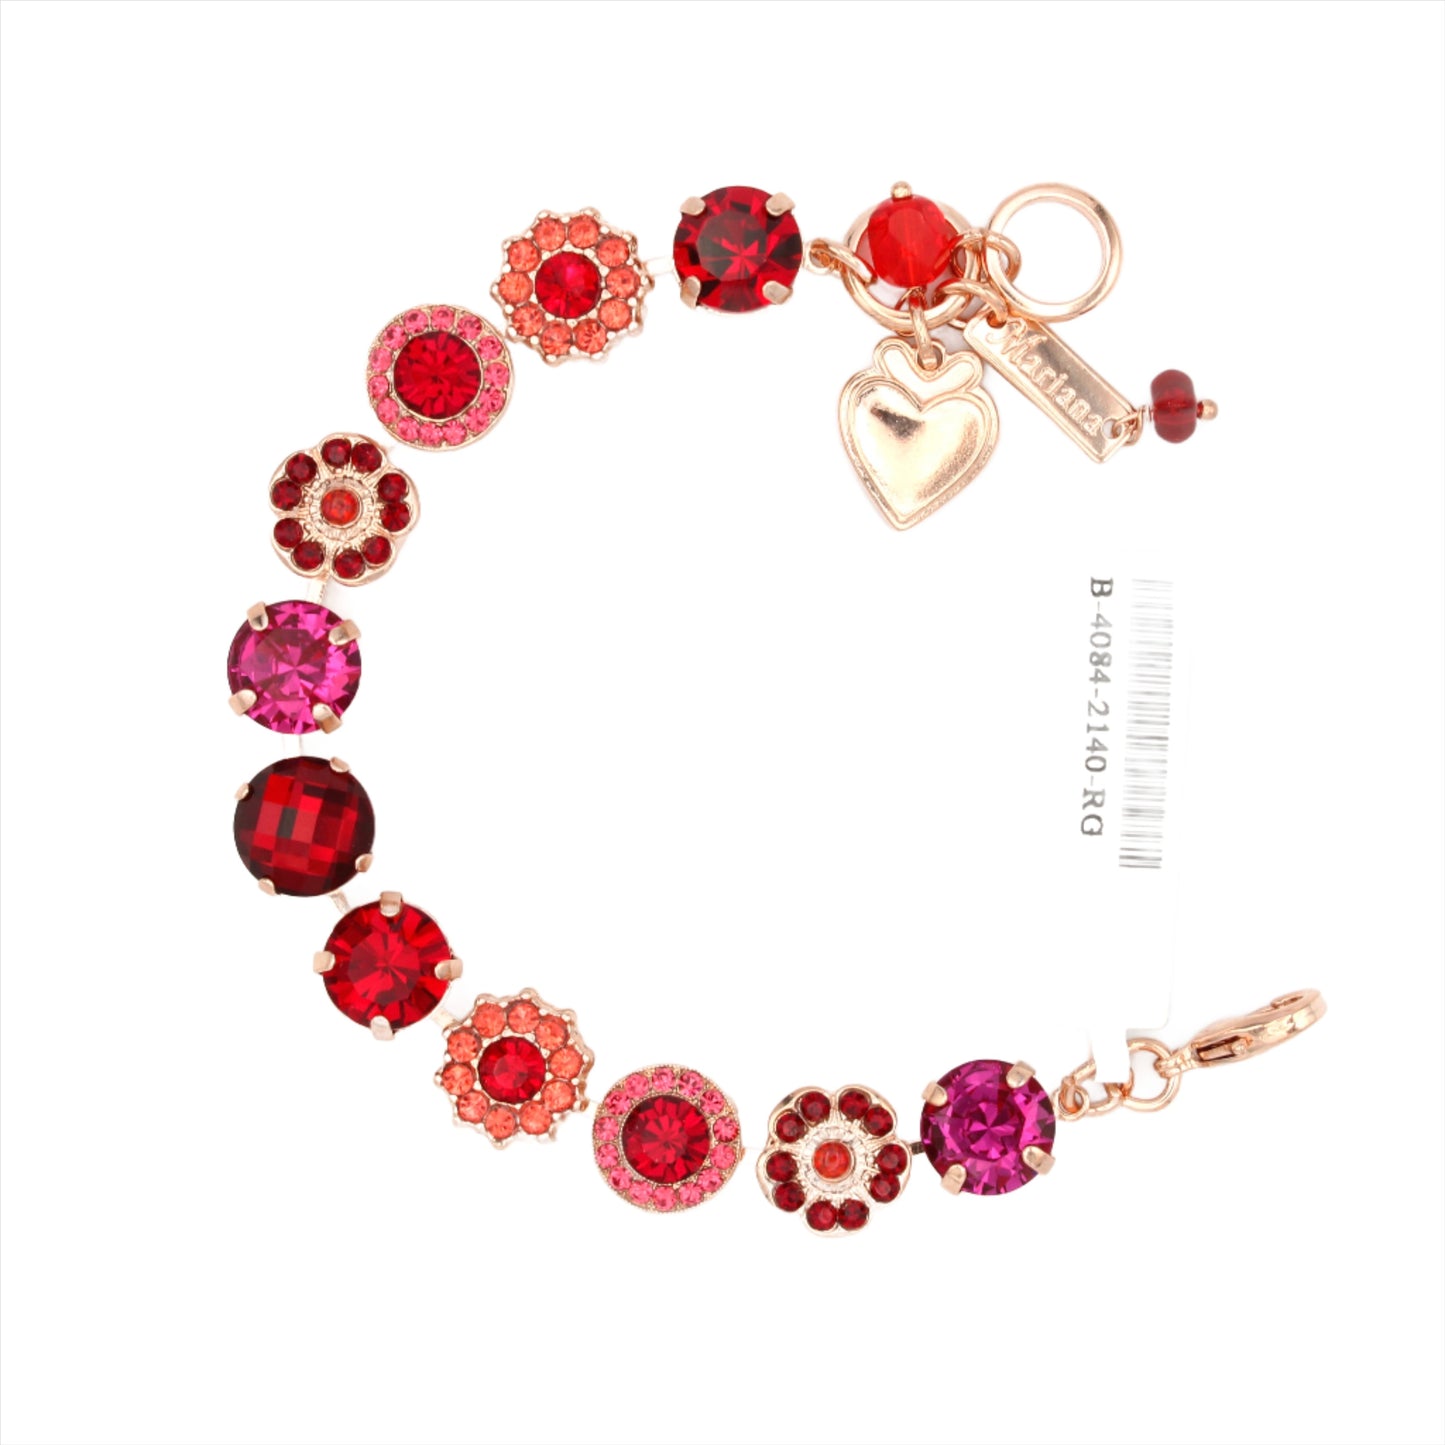 Firefly Collection Large Rosette Bracelet in Rose Gold